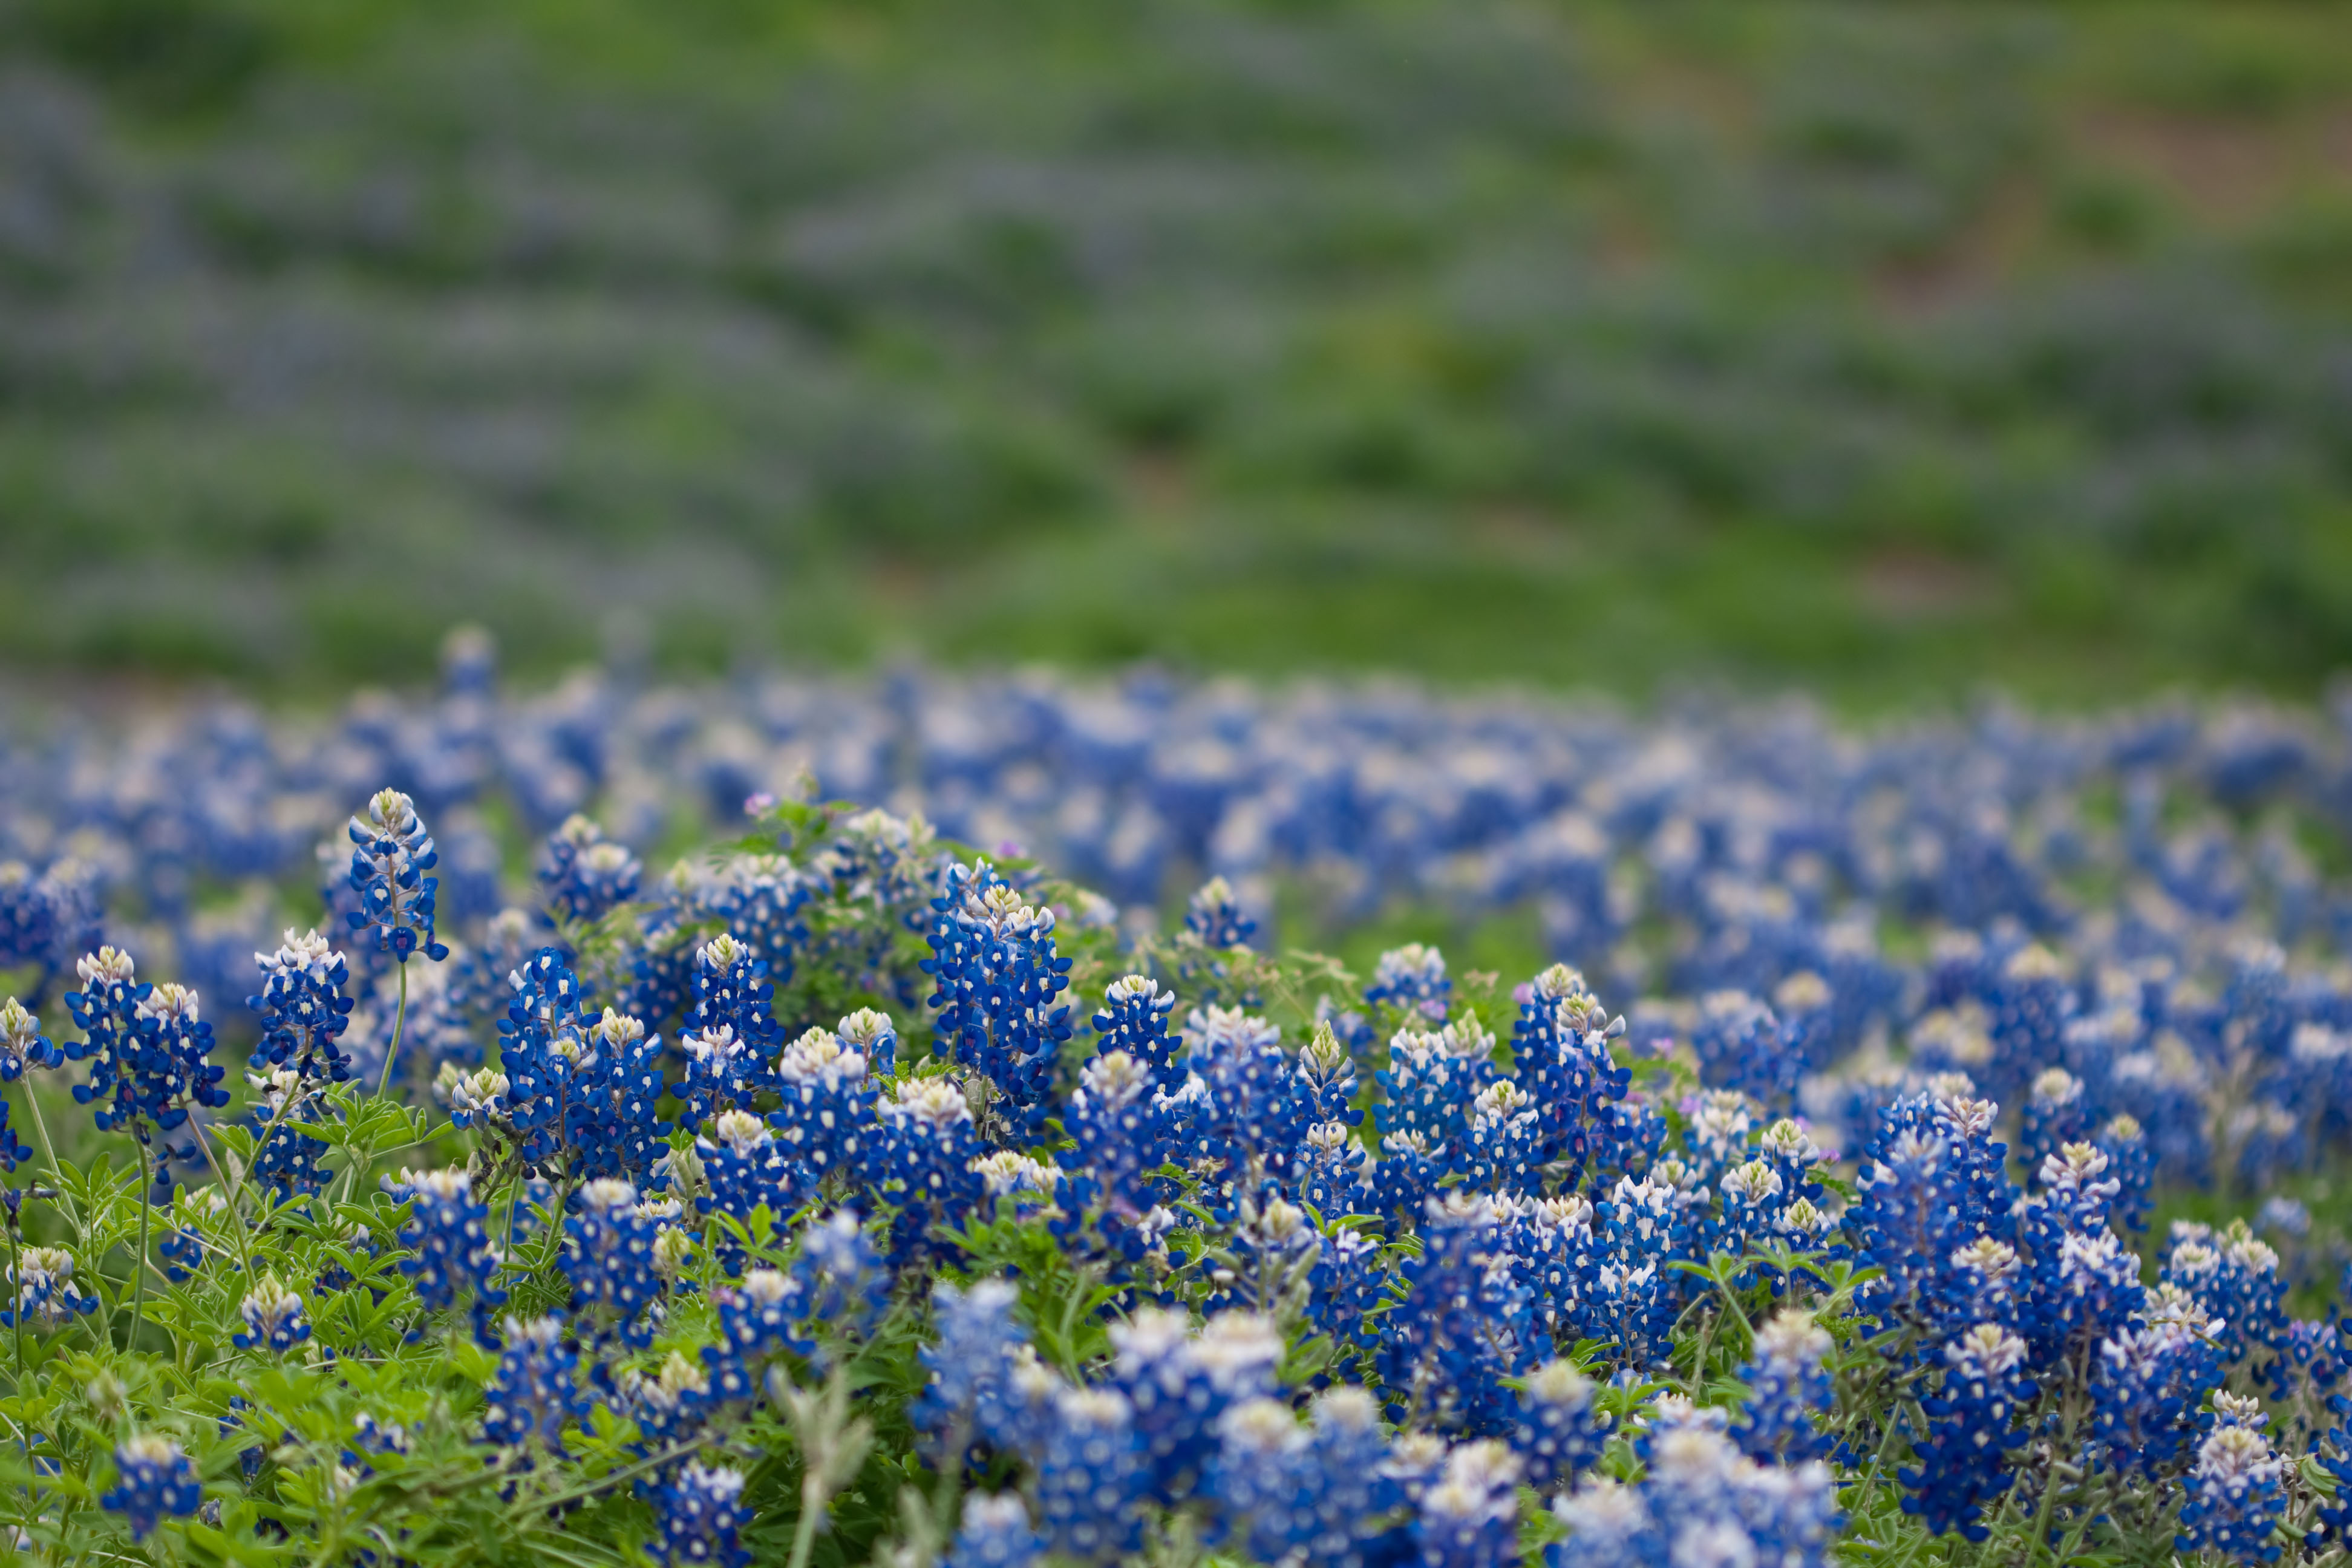 Planting bluebonnet seeds in cold climates